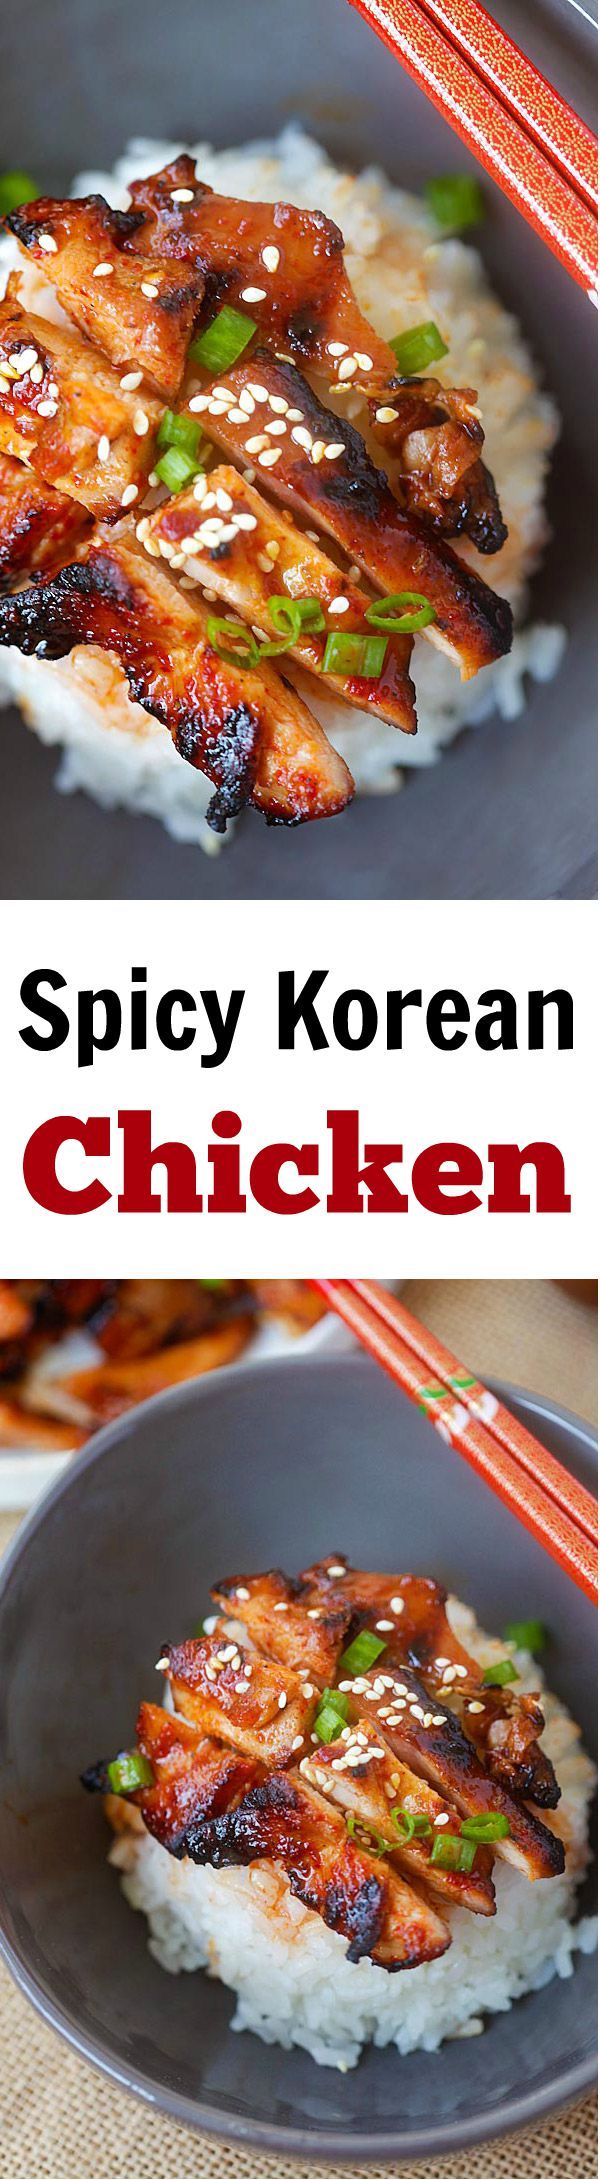 Spicy Korean Chicken - amazing and super yummy Korean chicken with spicy marinade. So quick and easy to make, cheaper, and better than takeouts | rasamalaysia.com